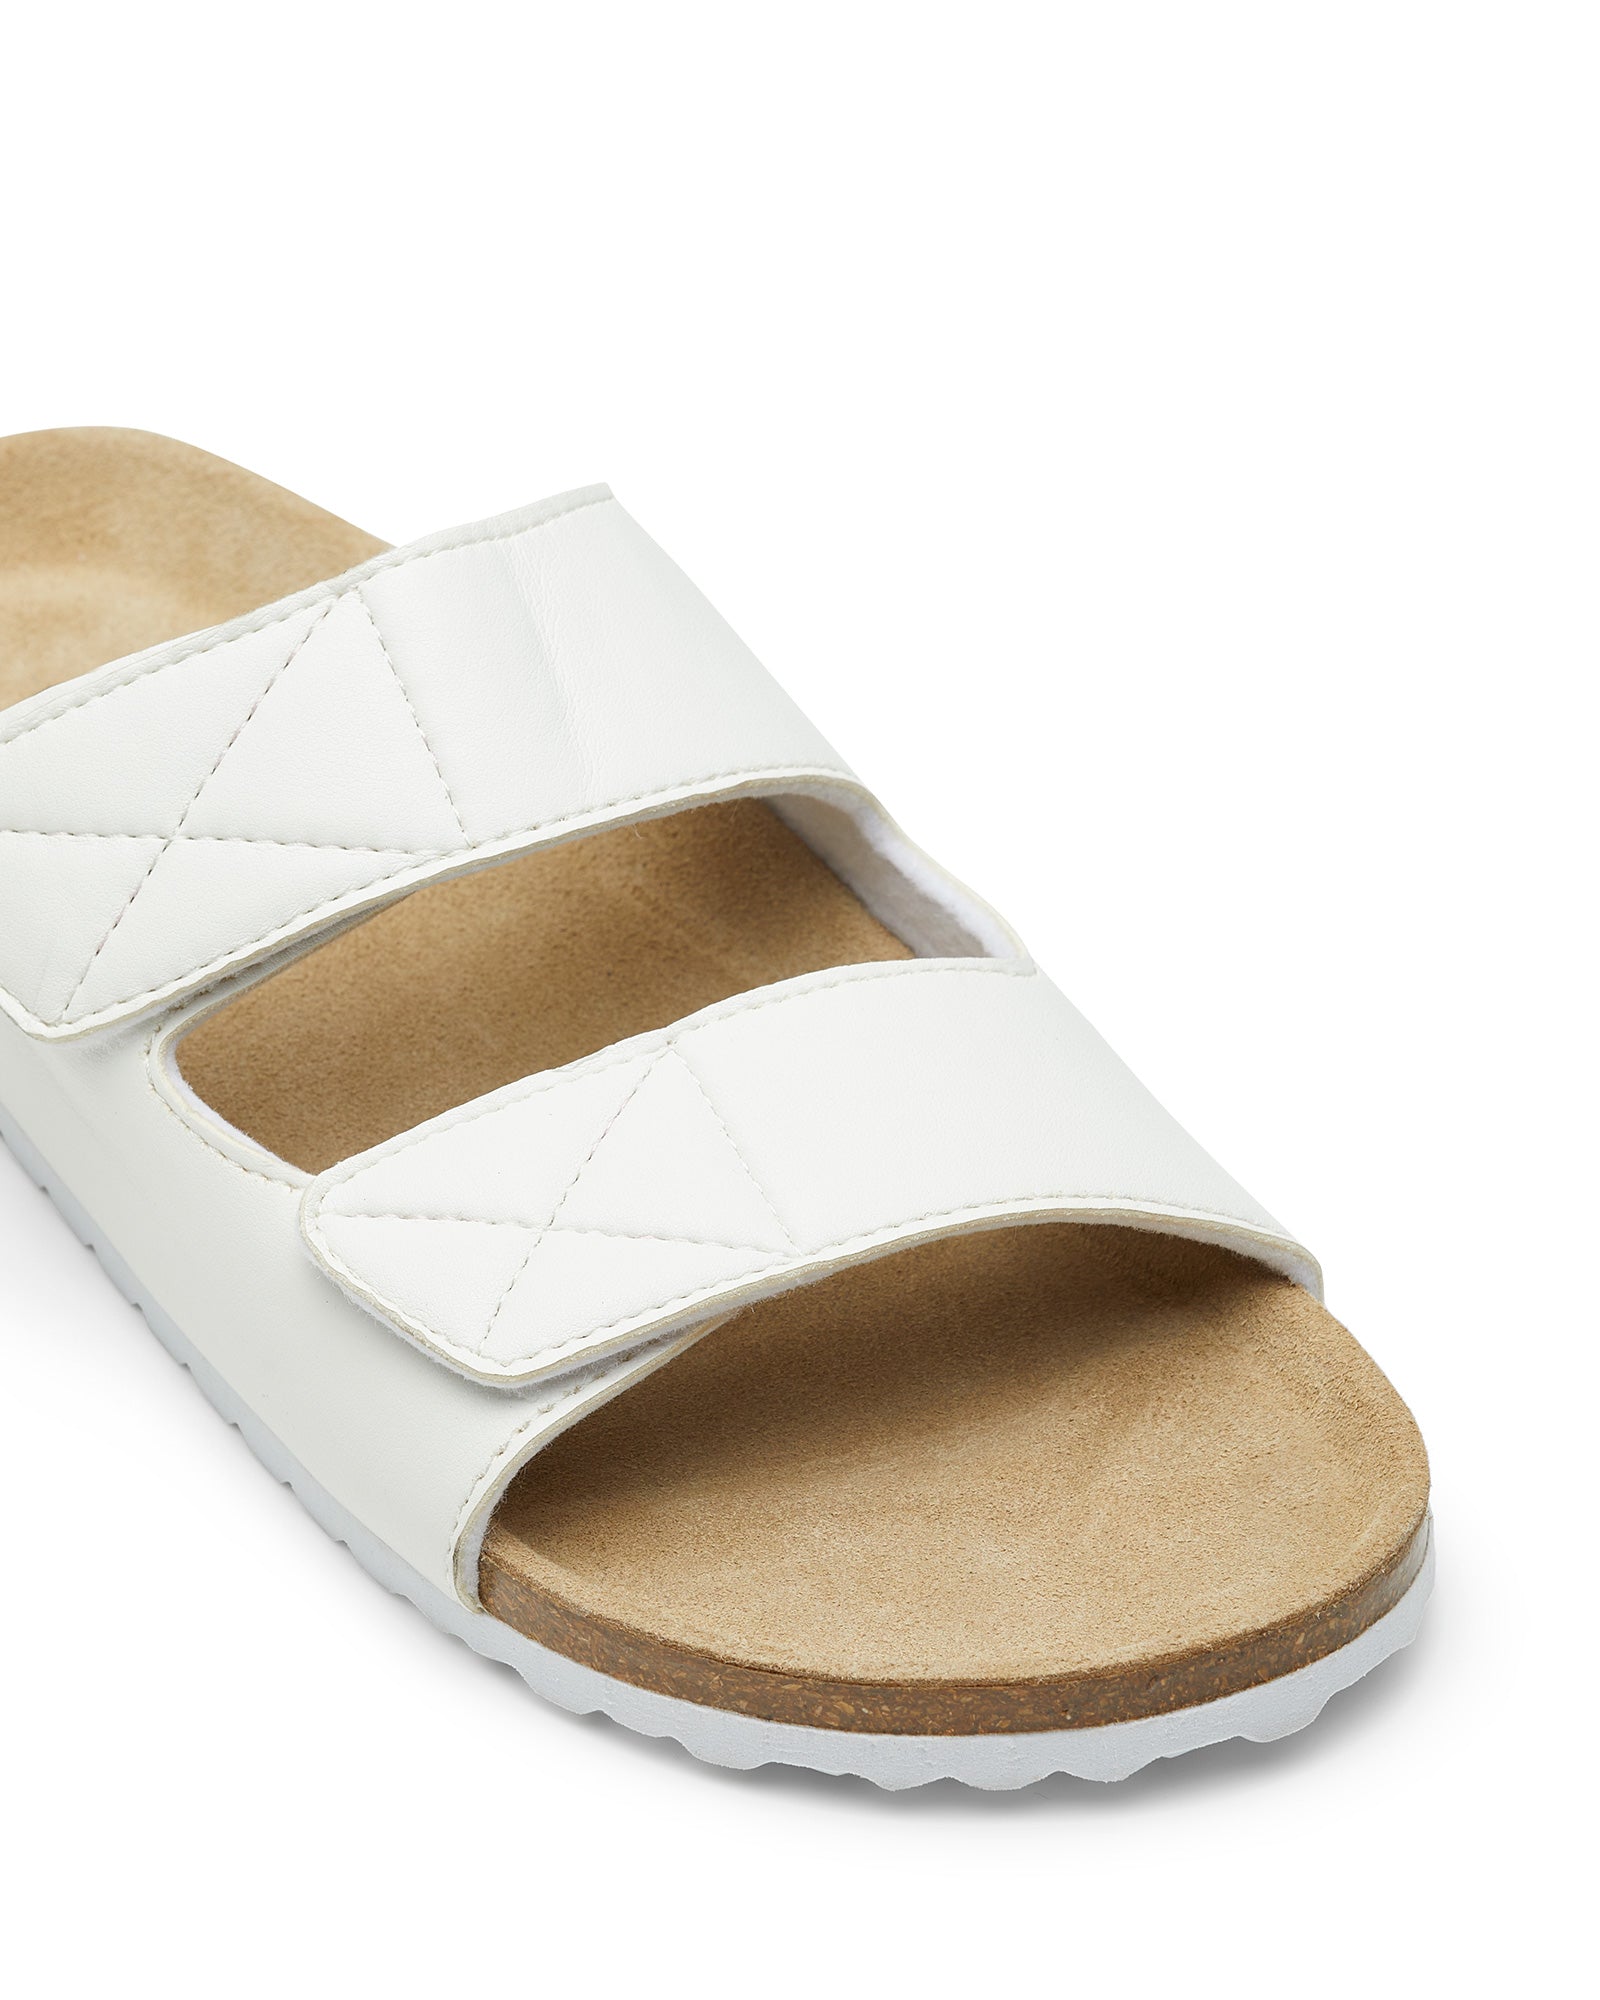 Therapy Shoes Stevie White | Women's Slides | Sandals | Flats | Velcro